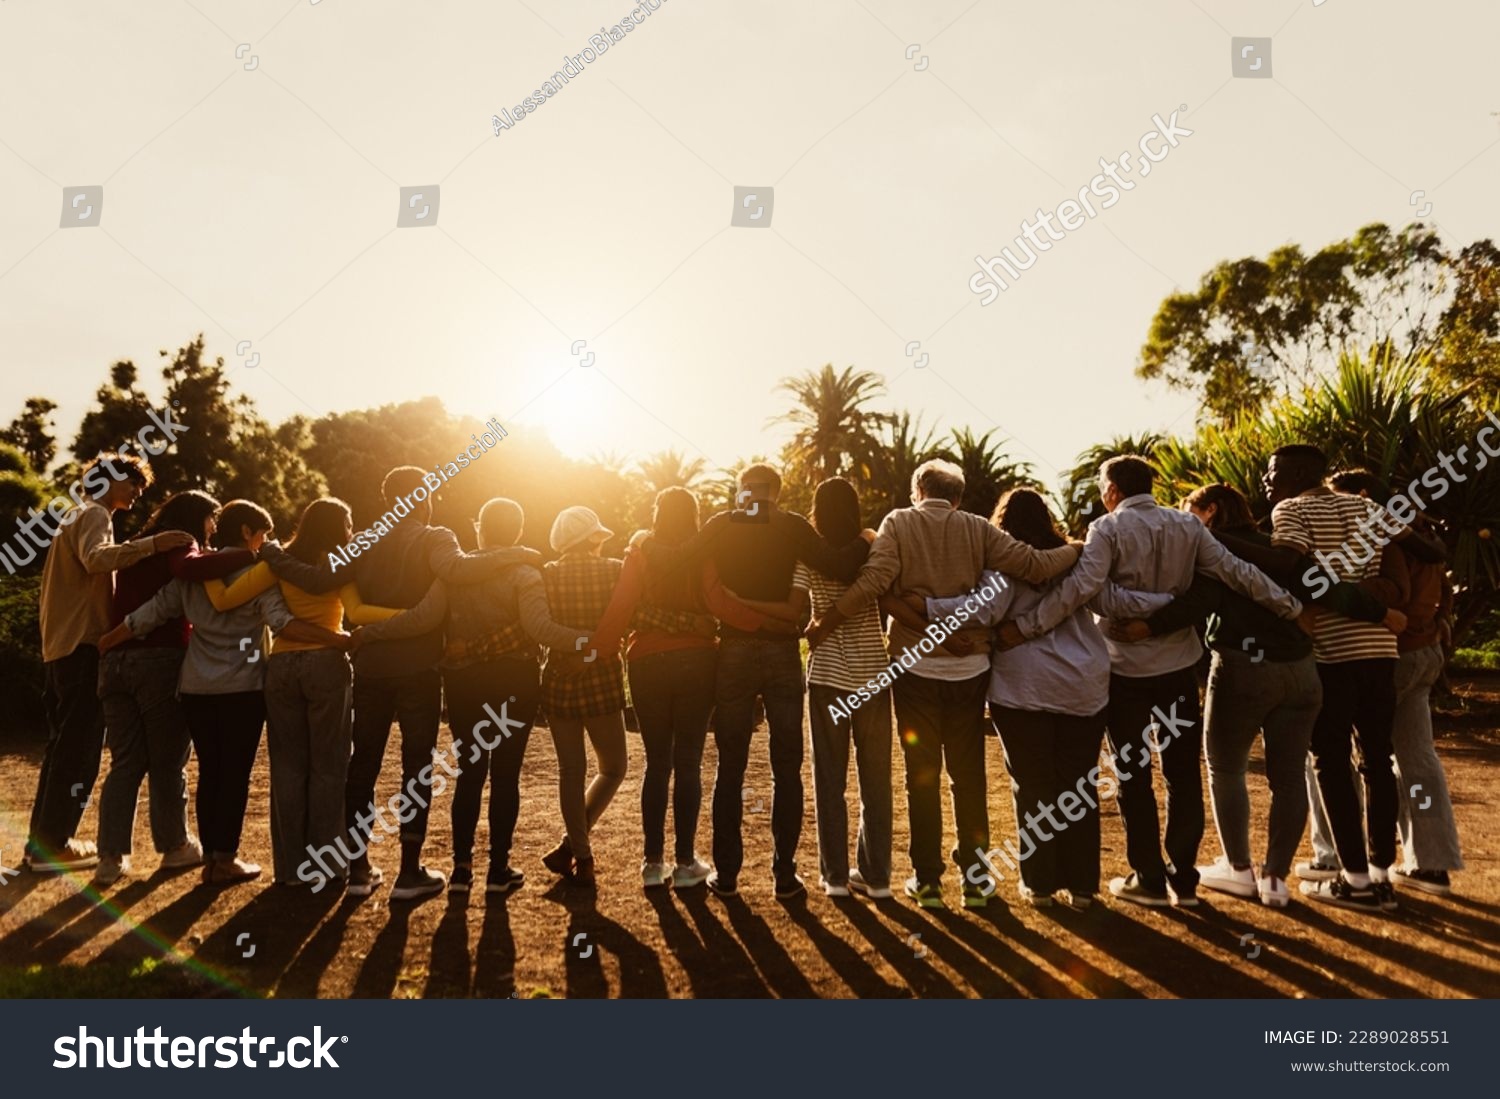 Back view of happy multigenerational people having fun in a public park during sunset time - Community and support concept  #2289028551